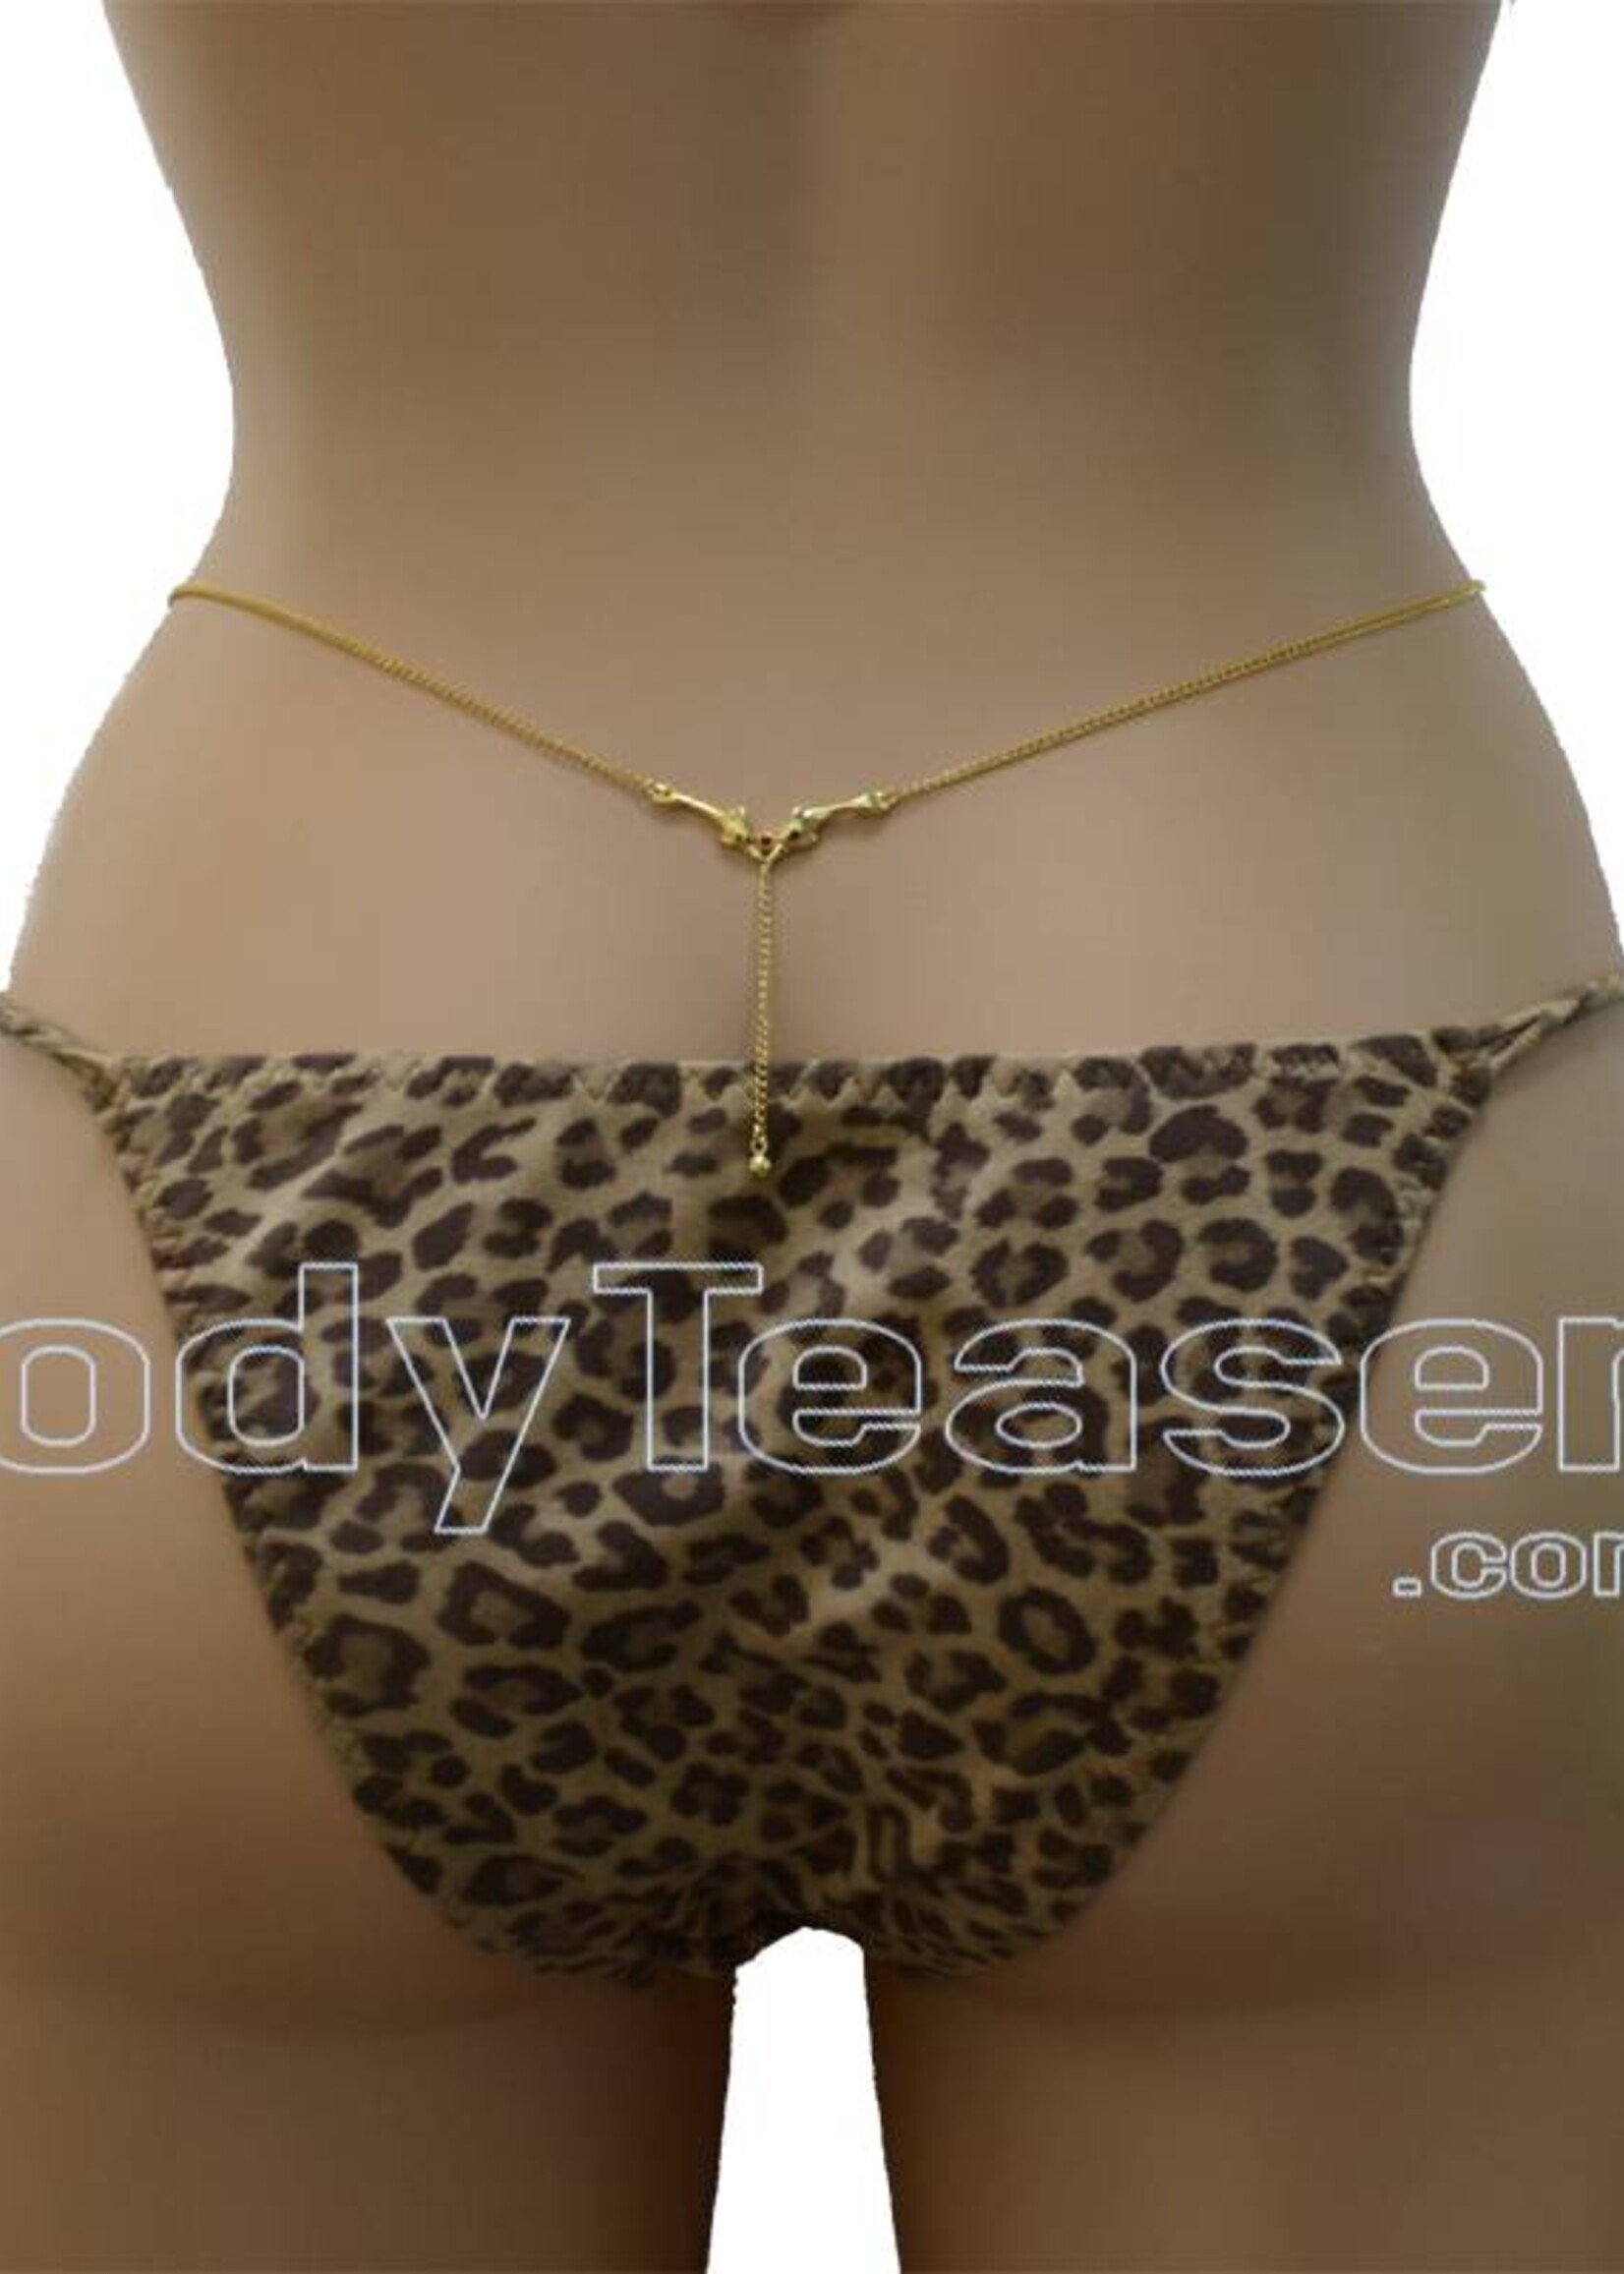 Back Belly Chain made of Gold plated Sterling Silver